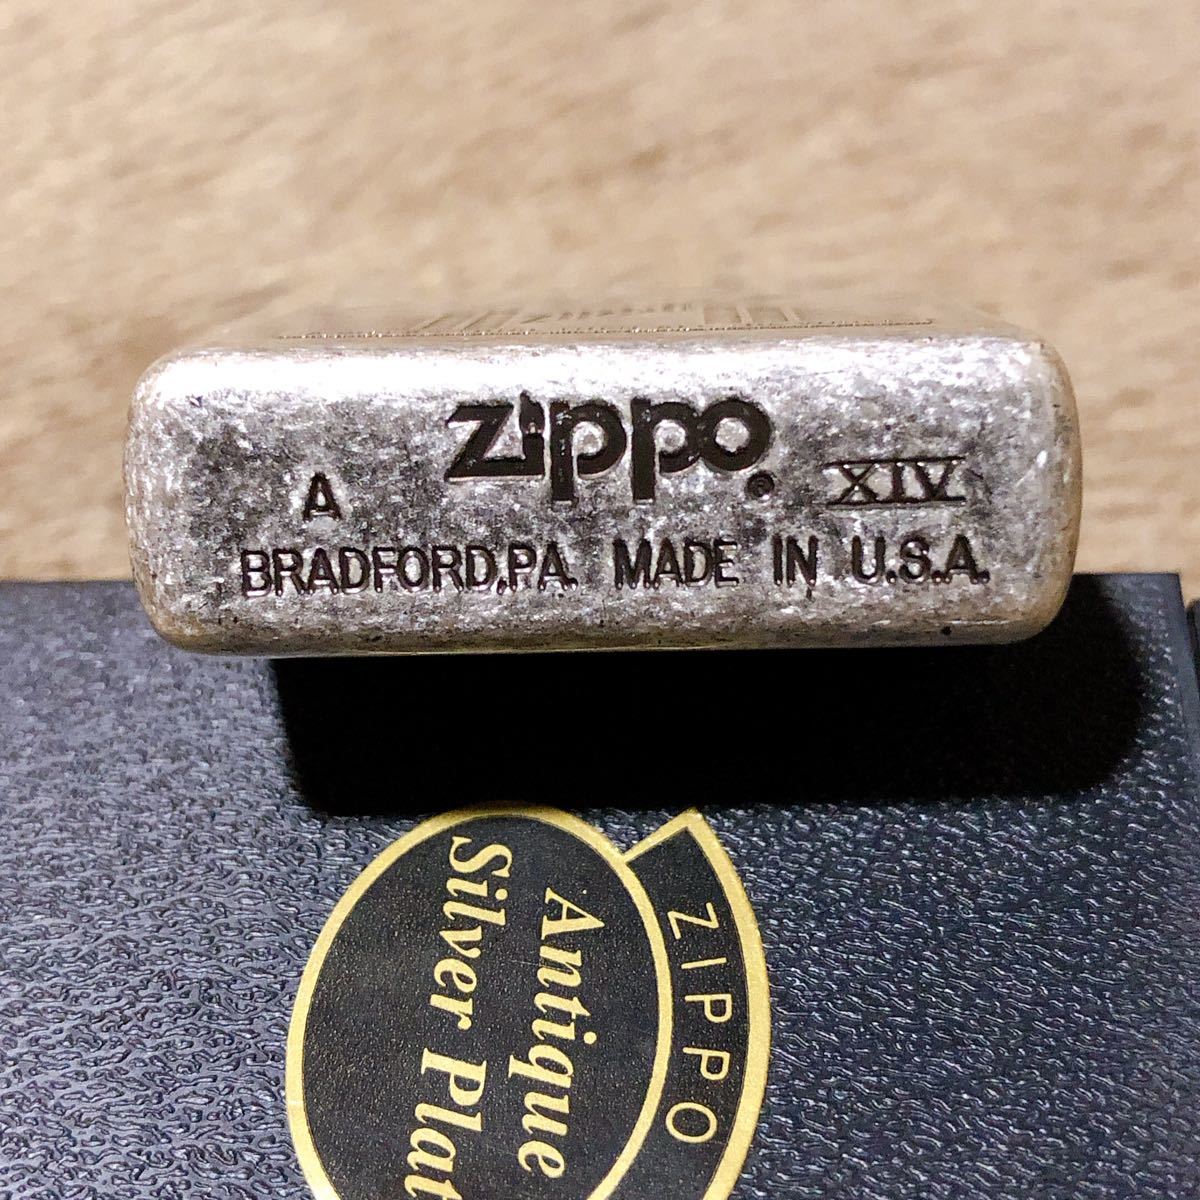 A Weeks Trial Then All The While zippo ジッポ